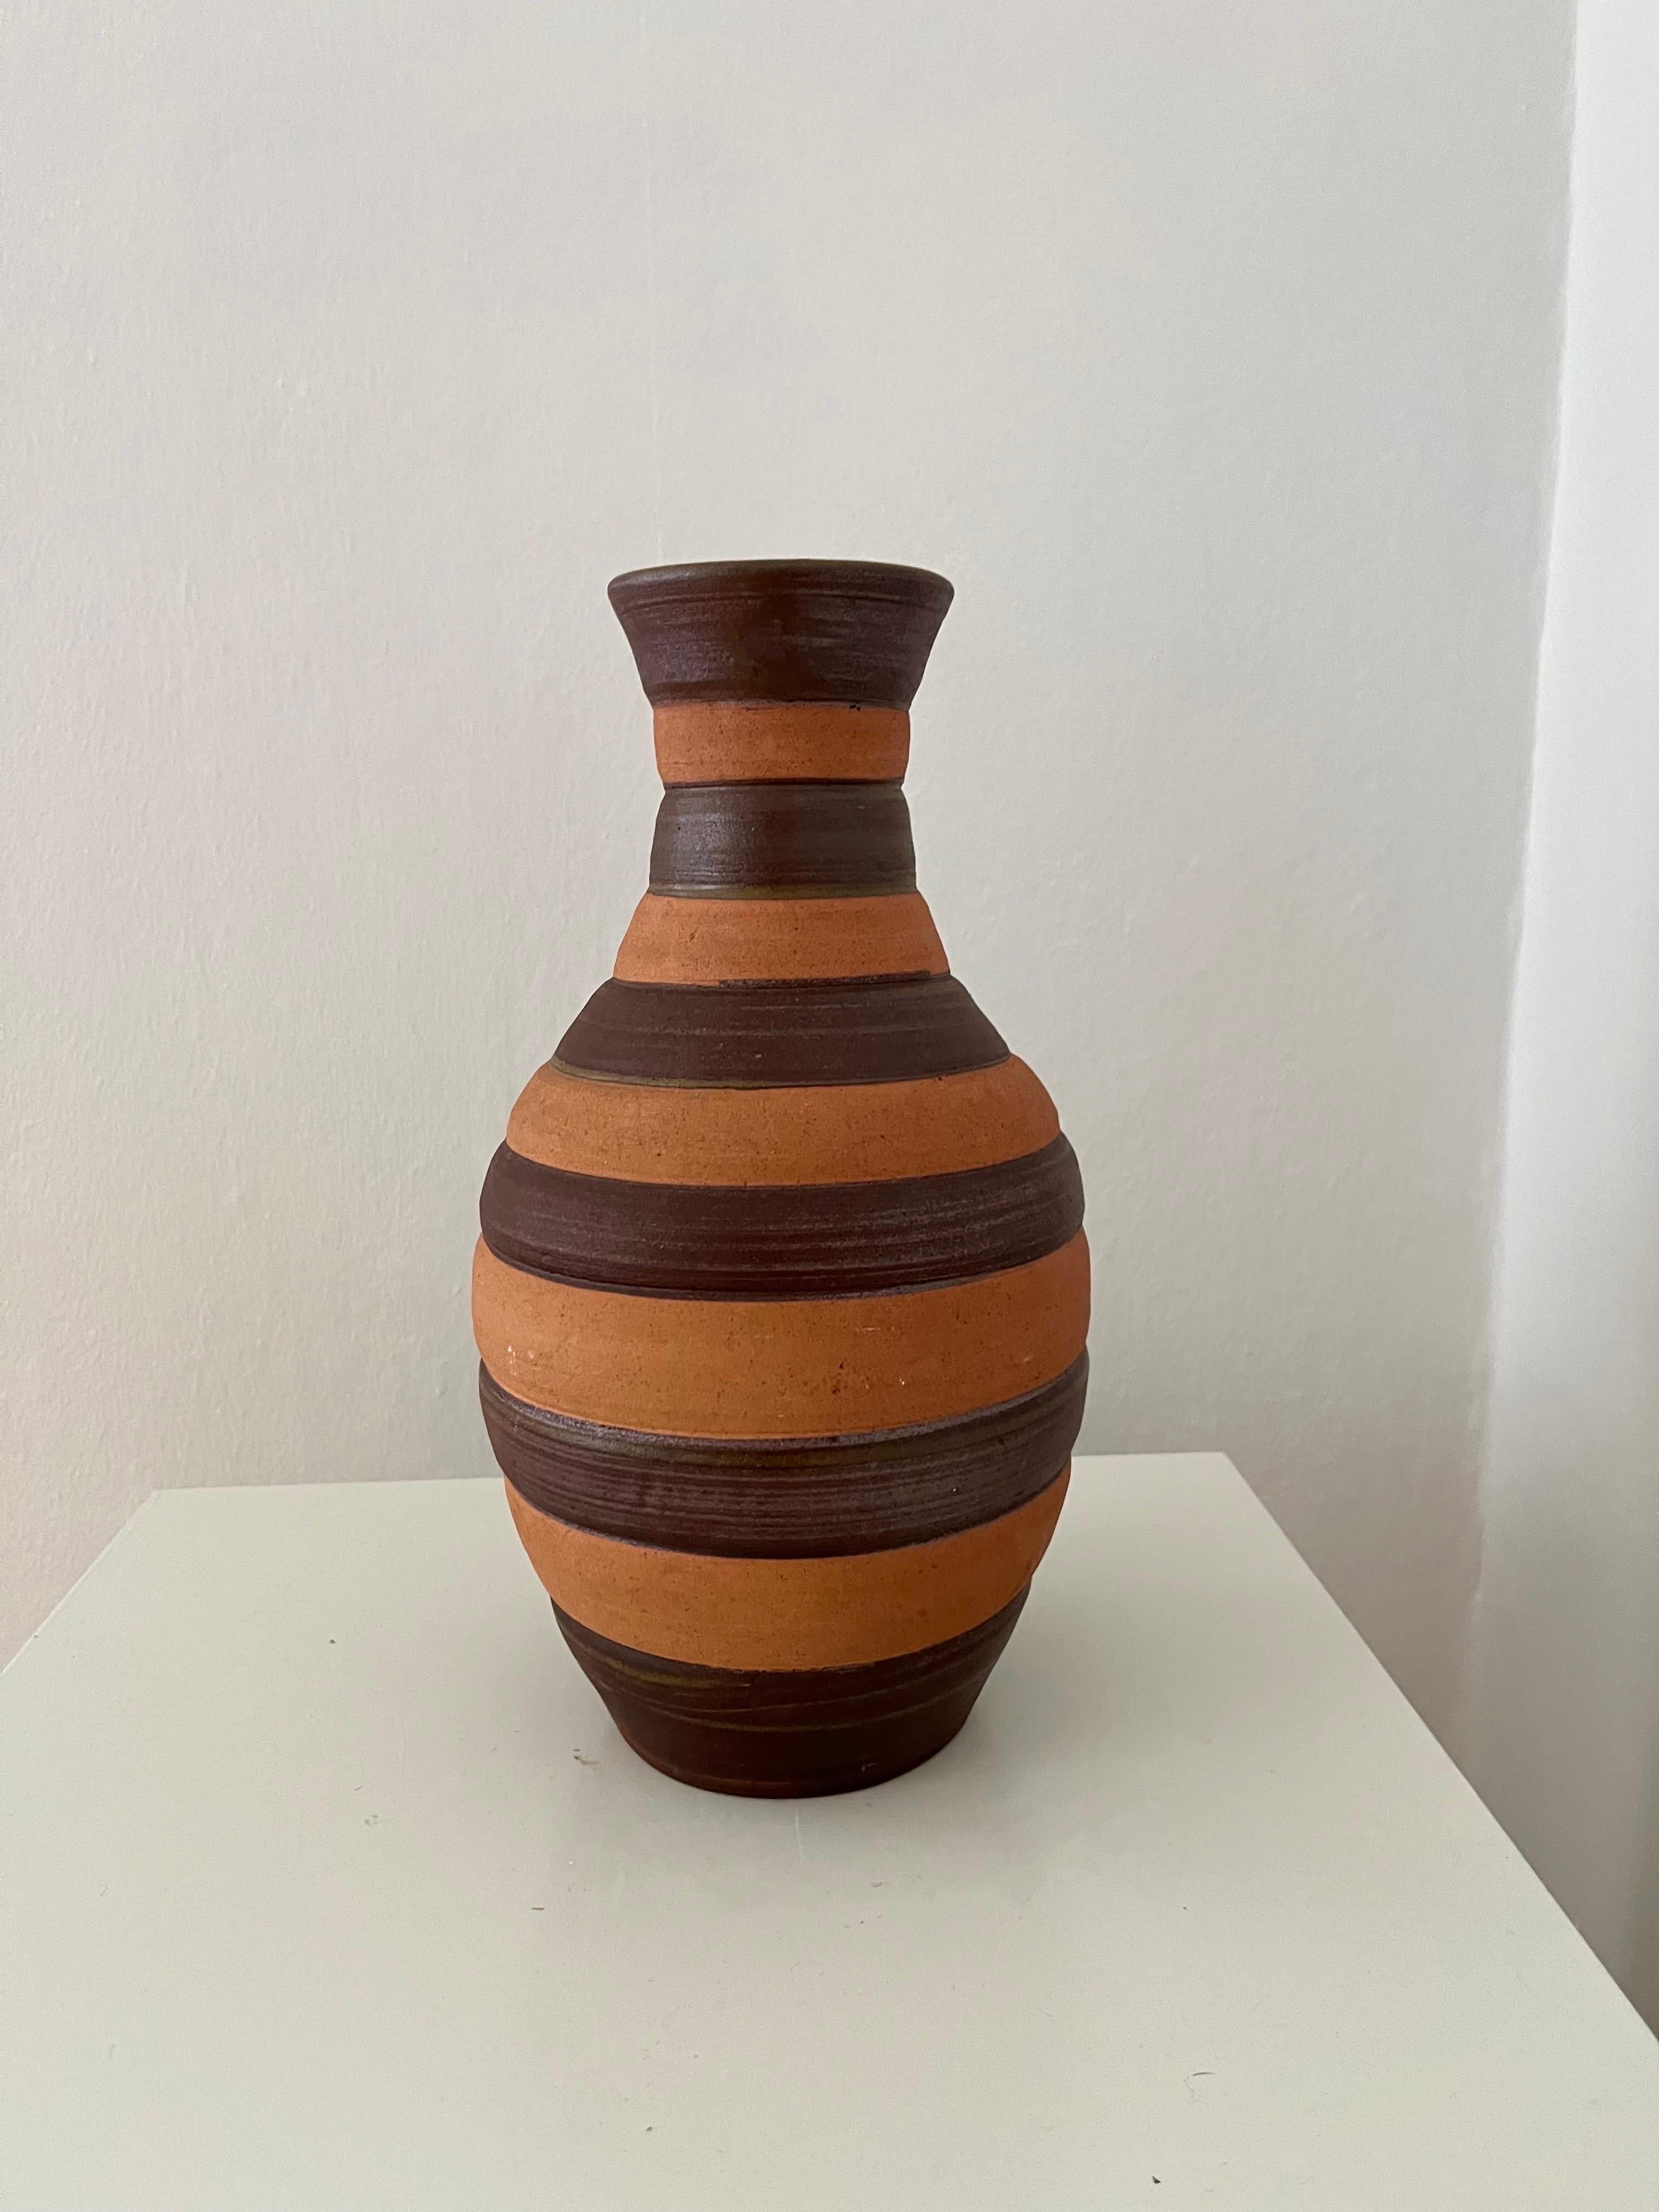 Swedish handmade ceramics vase 1960s. Hand-thrown vase in stoneware by Swedish ceramic artist Sven Bohlin (1921-1996) in two nuances of brown making a striped decoration. The lighter brown is matte, the darker brown is glazed. 
Signed / engraved